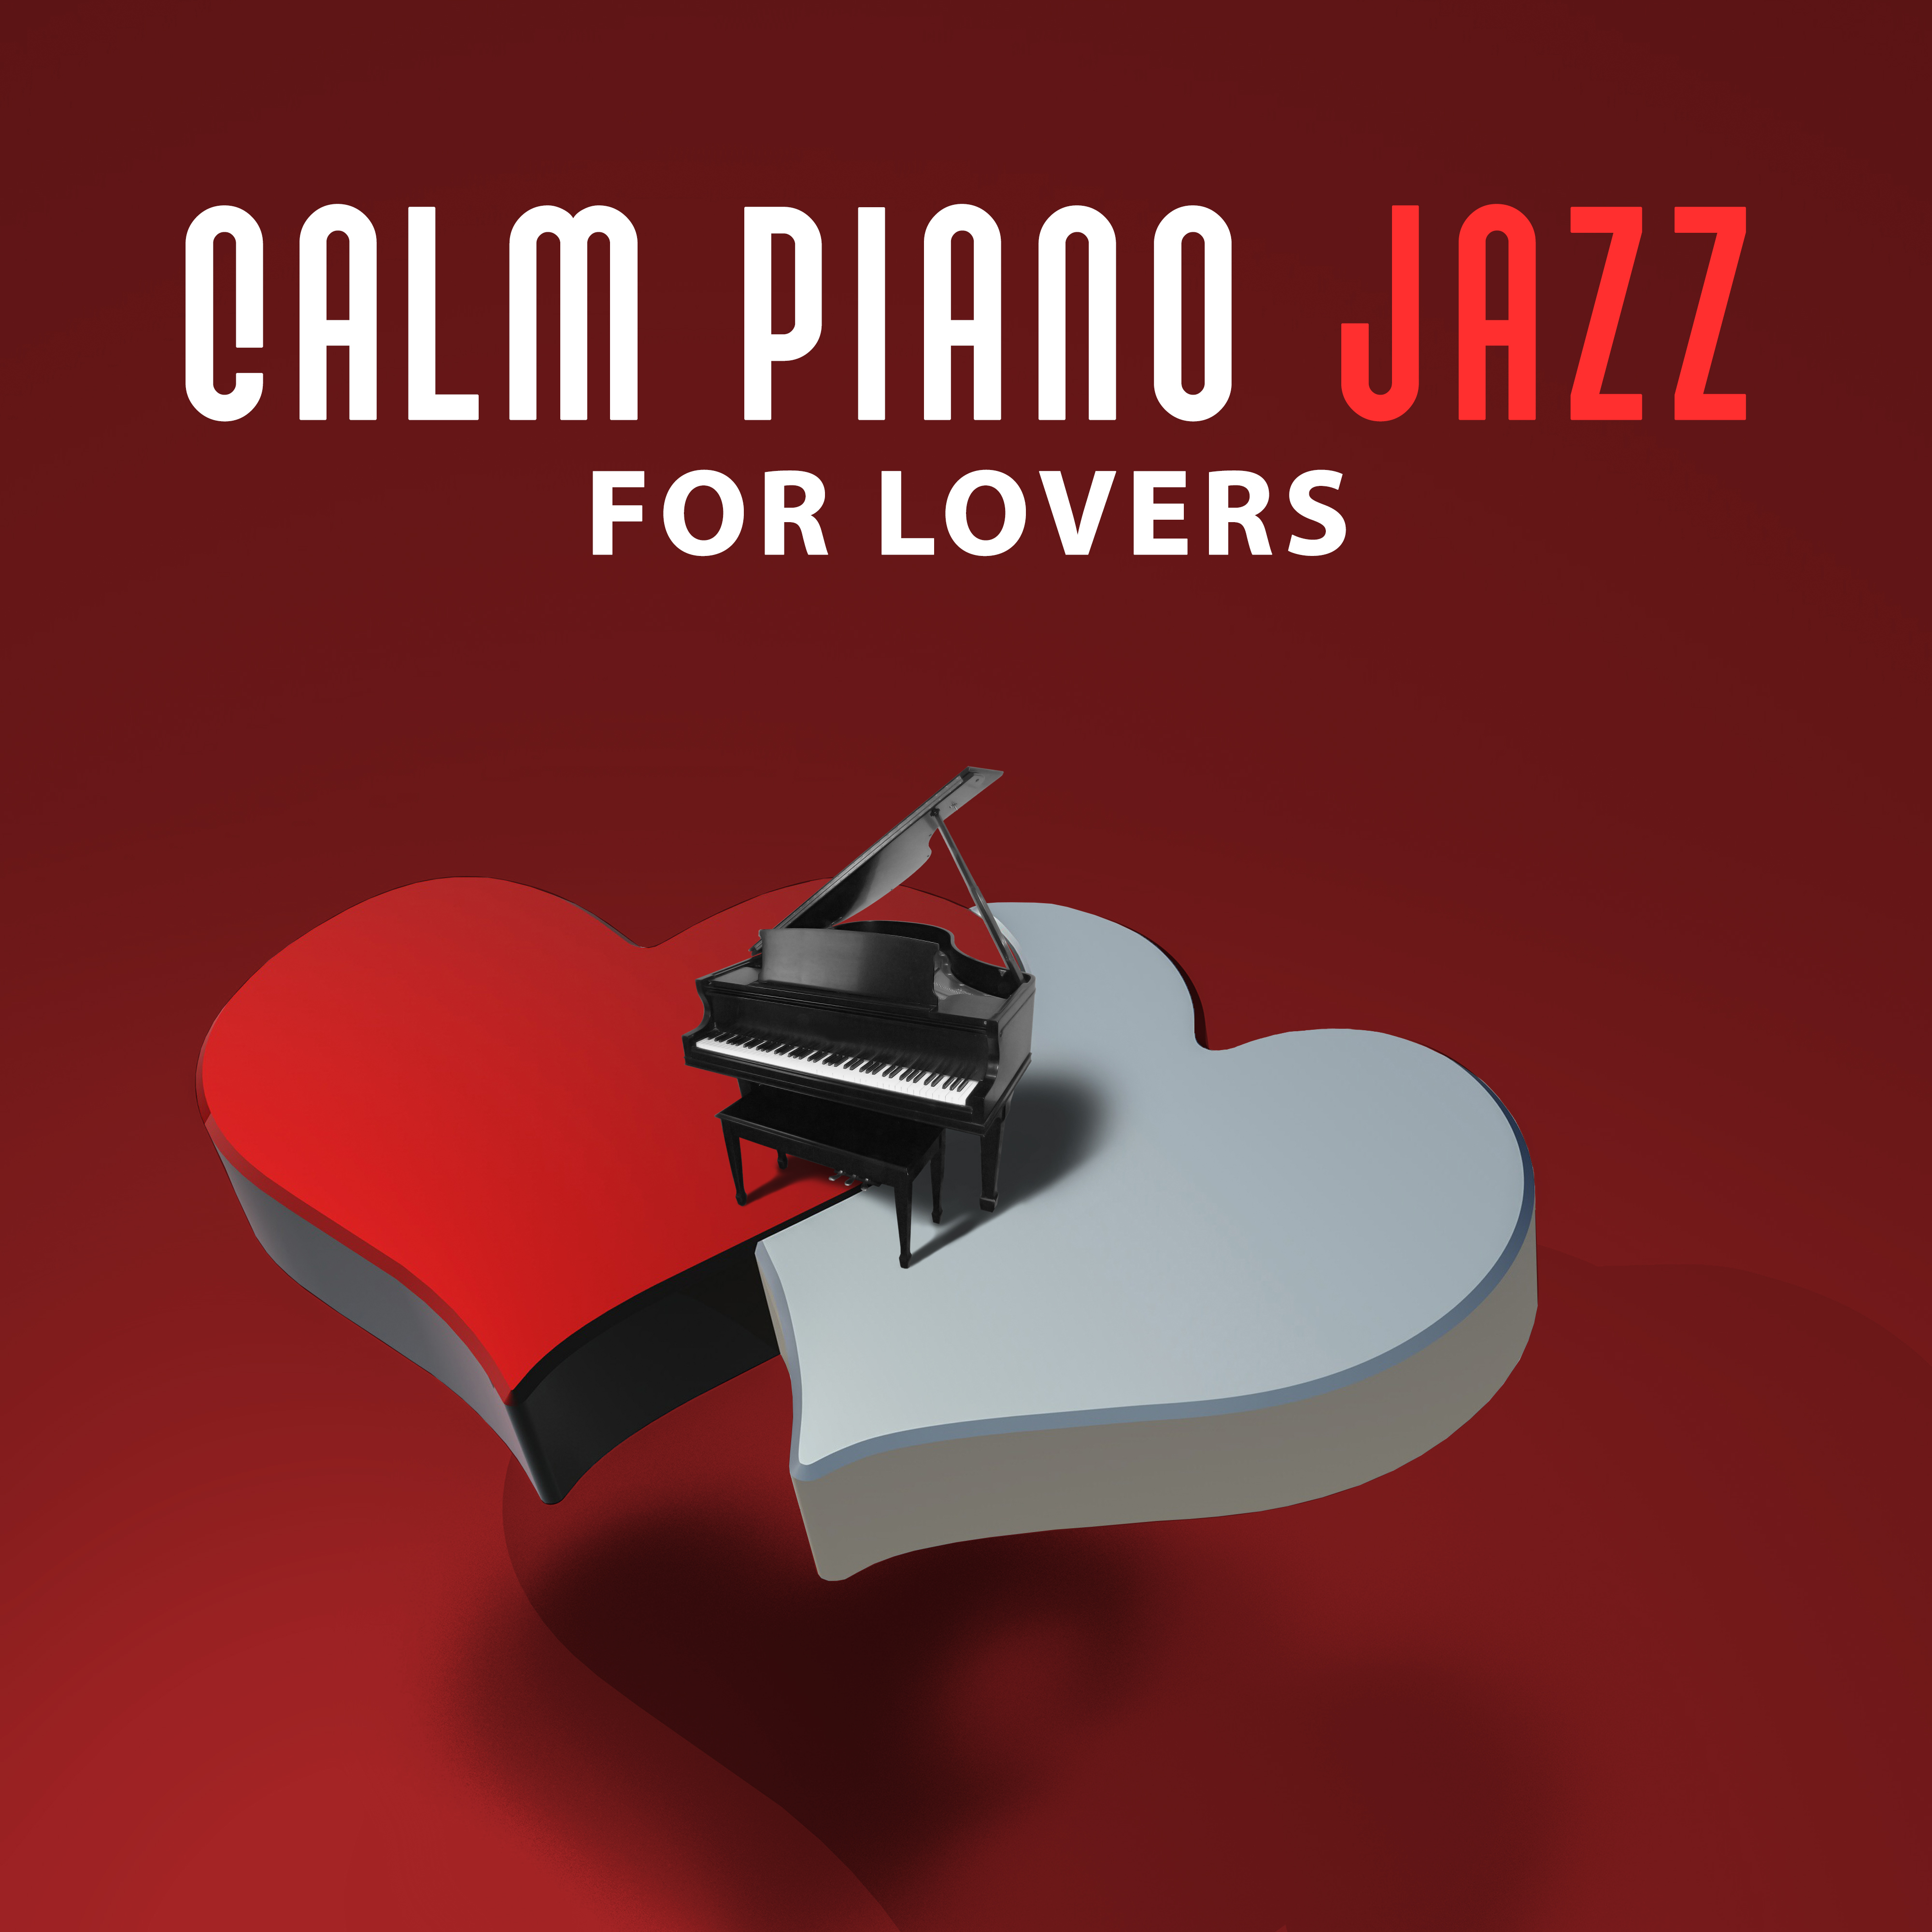 Calm Piano Jazz for Lovers – Relaxing Piano Jazz, Romantic Massage, Sensual Sounds for Romantic Evening